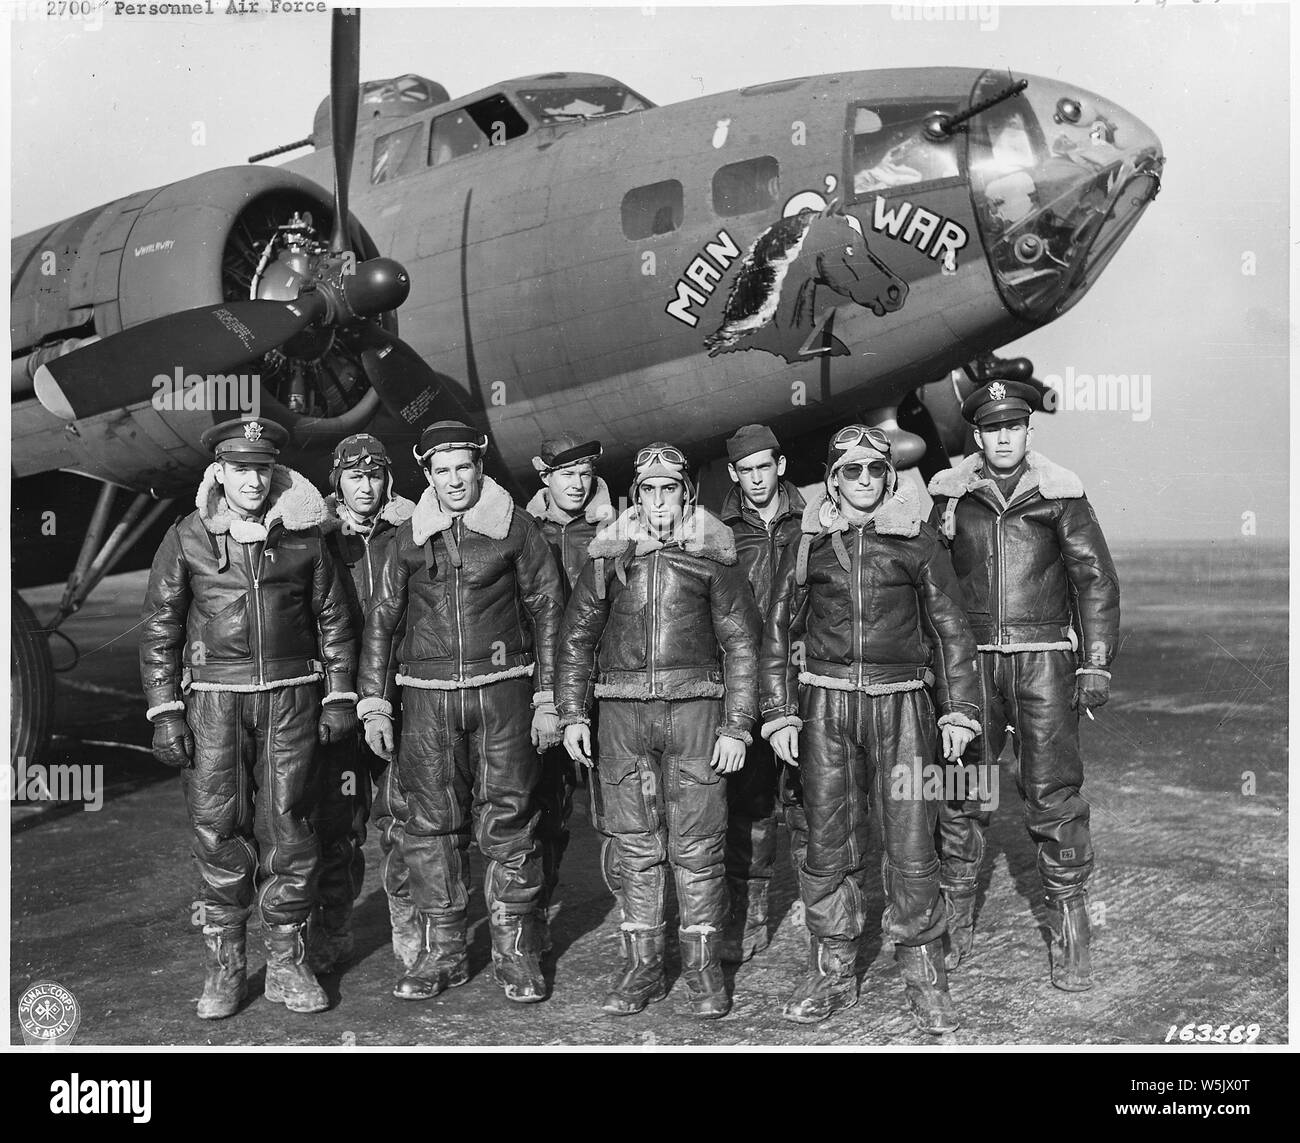 Air Force personnel & equipment. The Pacific, England, Wash. DC. 1942-44 (mostly 1943); Scope and content:  U.S. Bomber crew somwhere in England. Lt. J.M. Stewart, Marrowbone, Ky., Lt. W.W. Dickey, Beverly, Mass., S/Sgt. R.C. Schnoyer, East Greenville, Pa., S/Sgt. H.L. Langan, Los Angeles, Calif., T.E. McMillan, Boonville, Oh., T/Sgt. C.J. Merriwether, Sanford, Fla., T/Sgt. Jack M. Wheeler, Des Moines, Ia., Lt. J.A. Creamer, Louisville, Ky. 367 Bomber Squad. Thurleigh, England. General notes:  The crew of the Boeing B-17F-5-BO Fortress (s/n 41-24399) Man-O-War from the 323rd Bomb Squadron, 91s Stock Photo